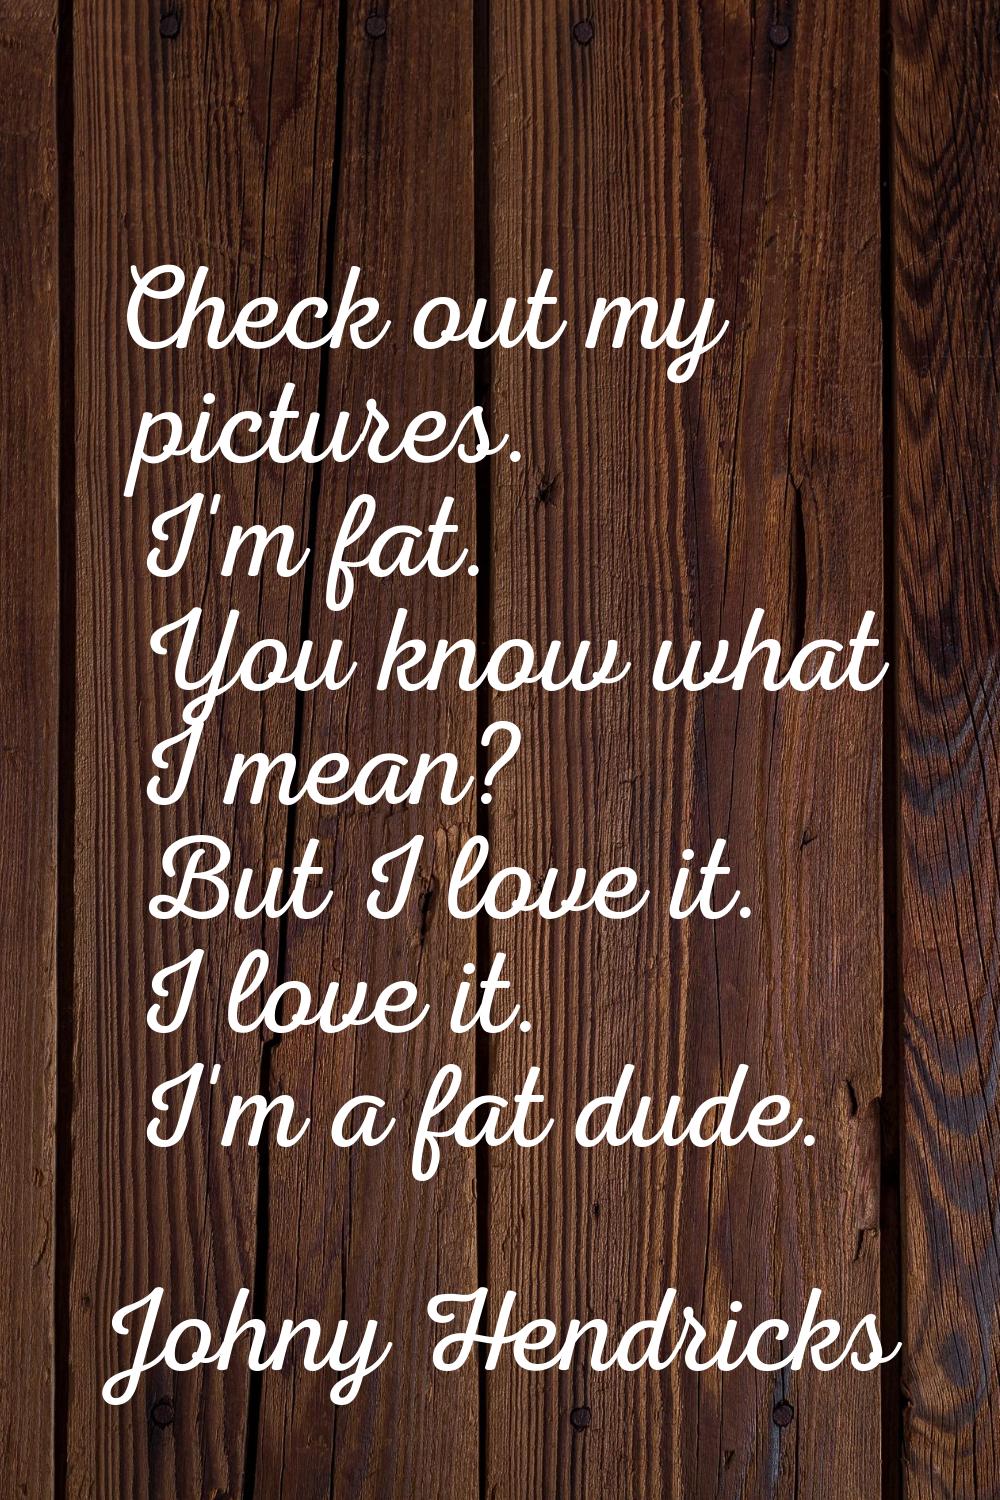 Check out my pictures. I'm fat. You know what I mean? But I love it. I love it. I'm a fat dude.